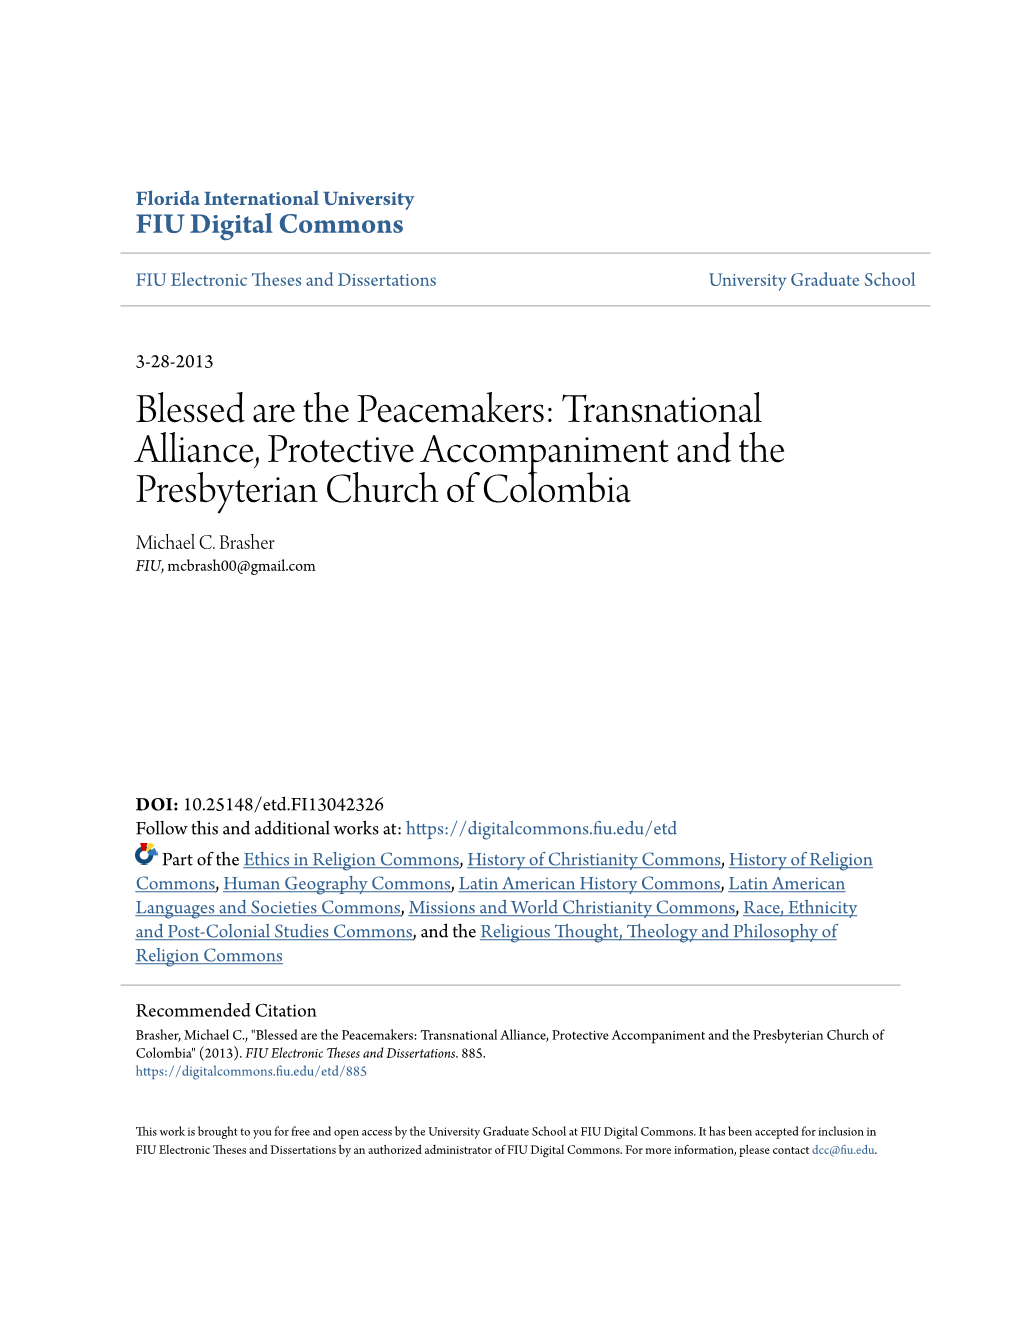 Transnational Alliance, Protective Accompaniment and the Presbyterian Church of Colombia Michael C